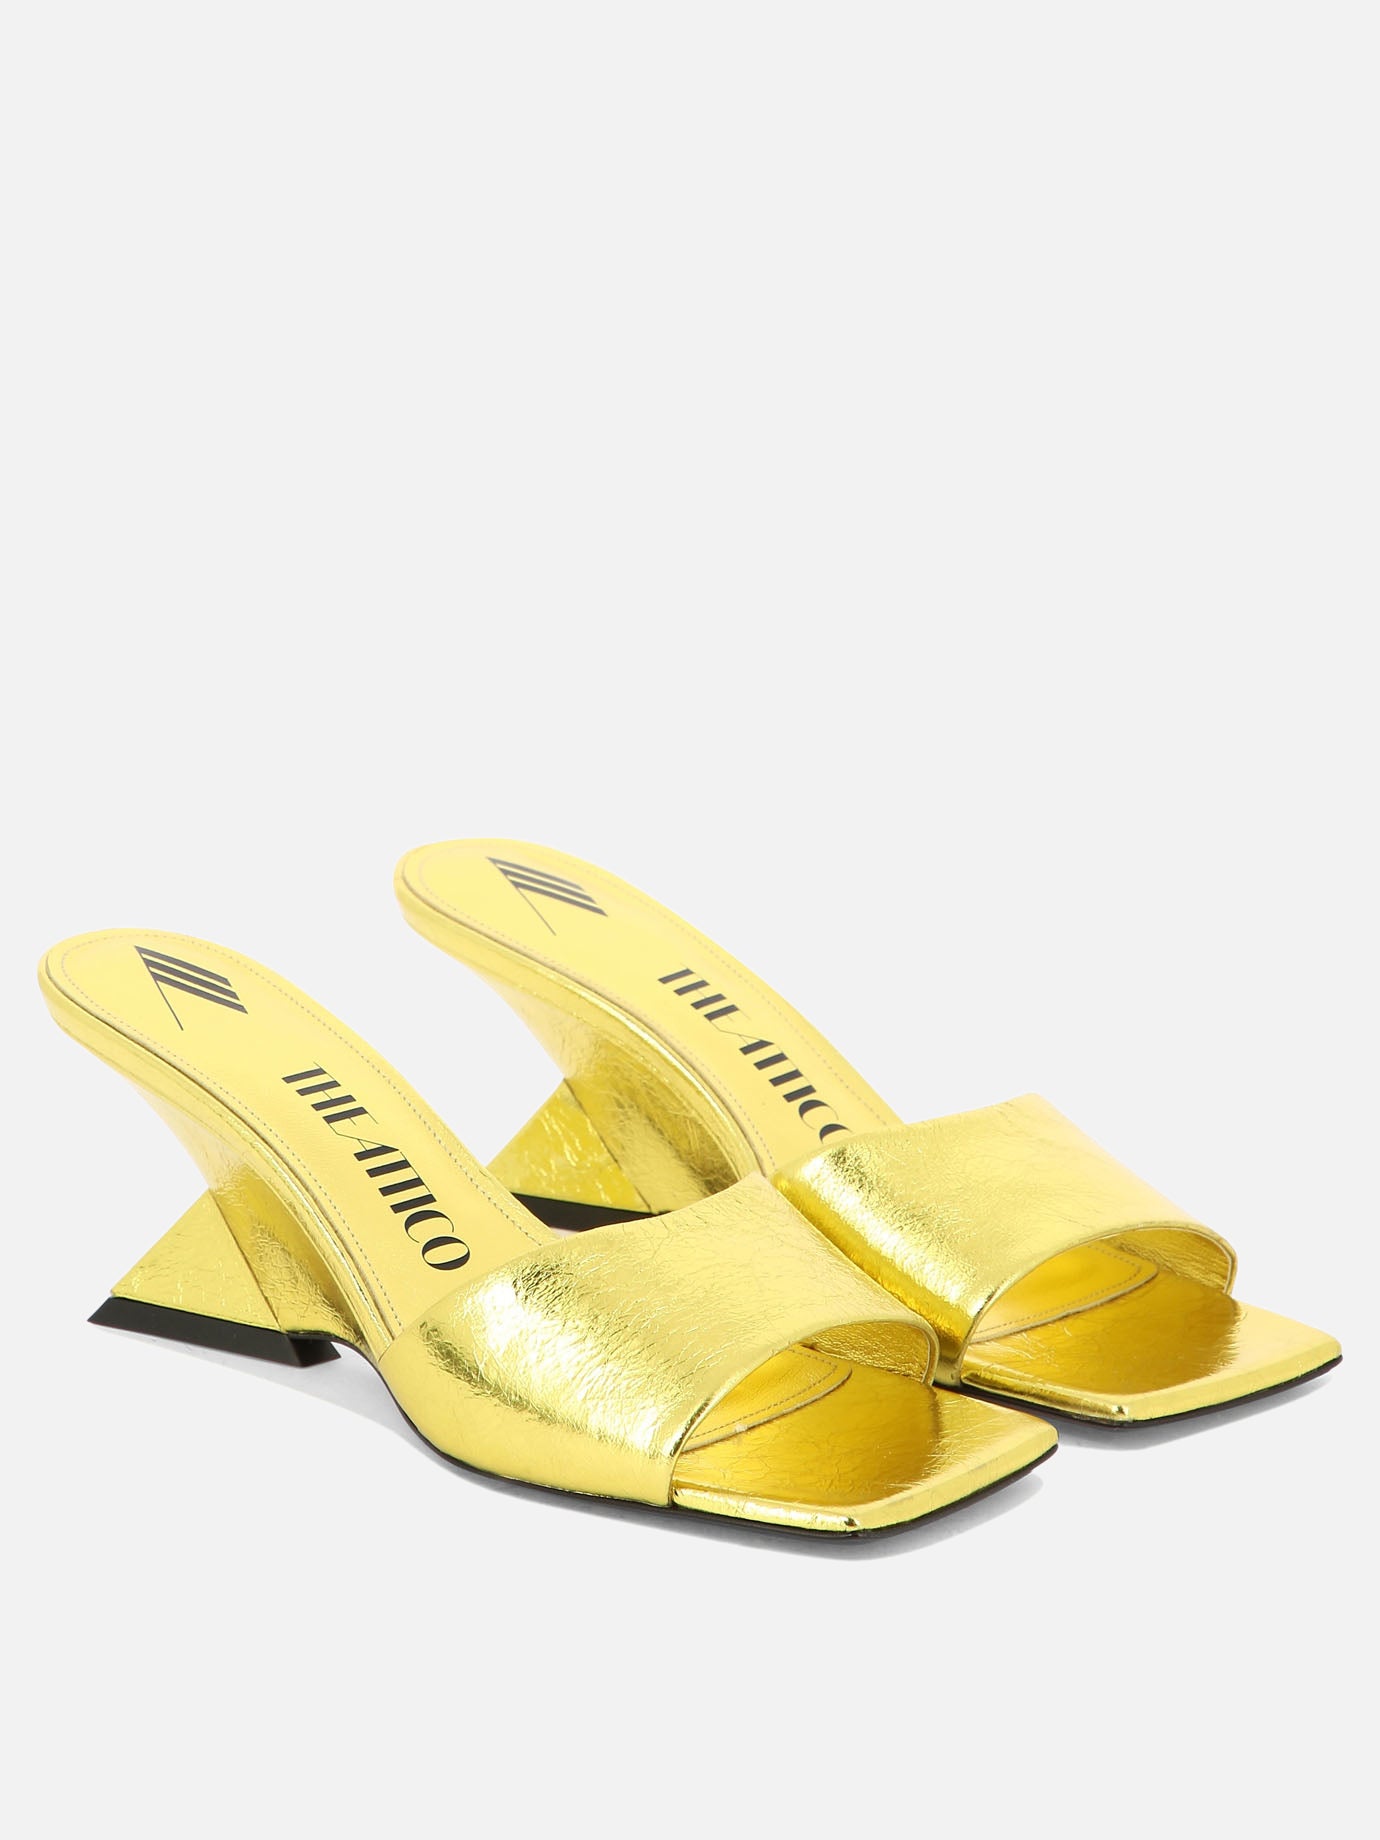 "Cheope" sandals